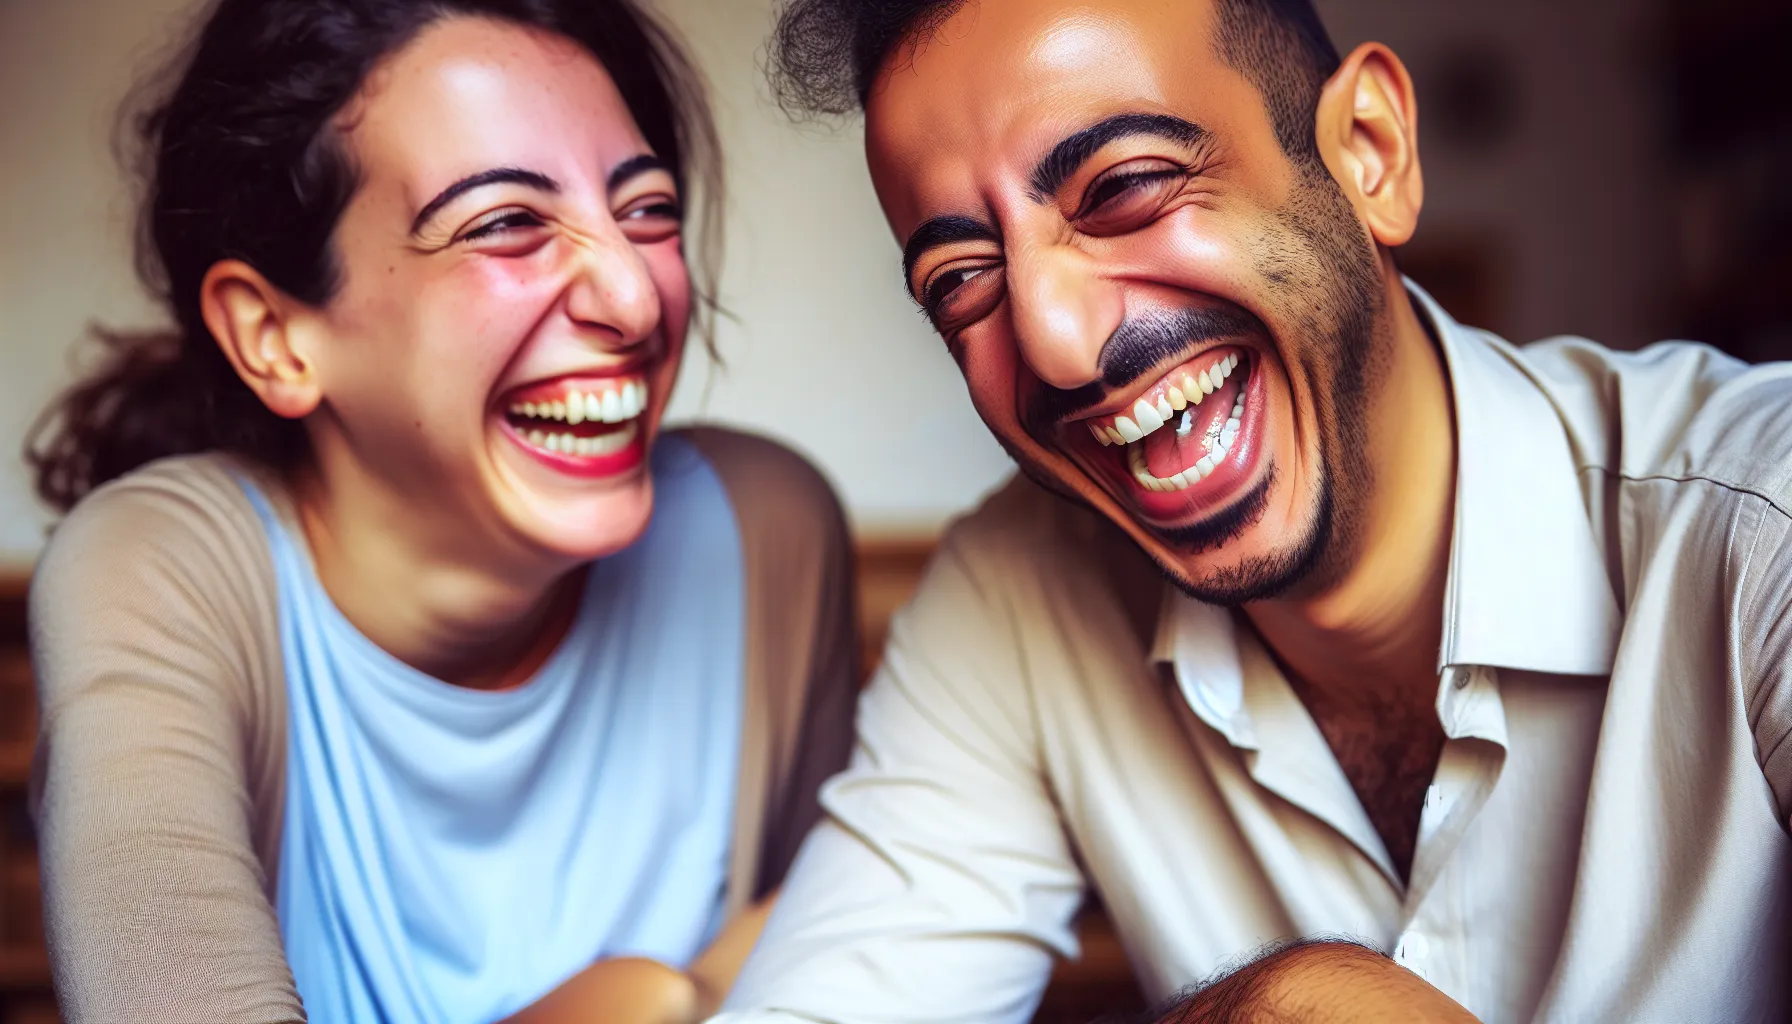 Two people sharing a moment of laughter